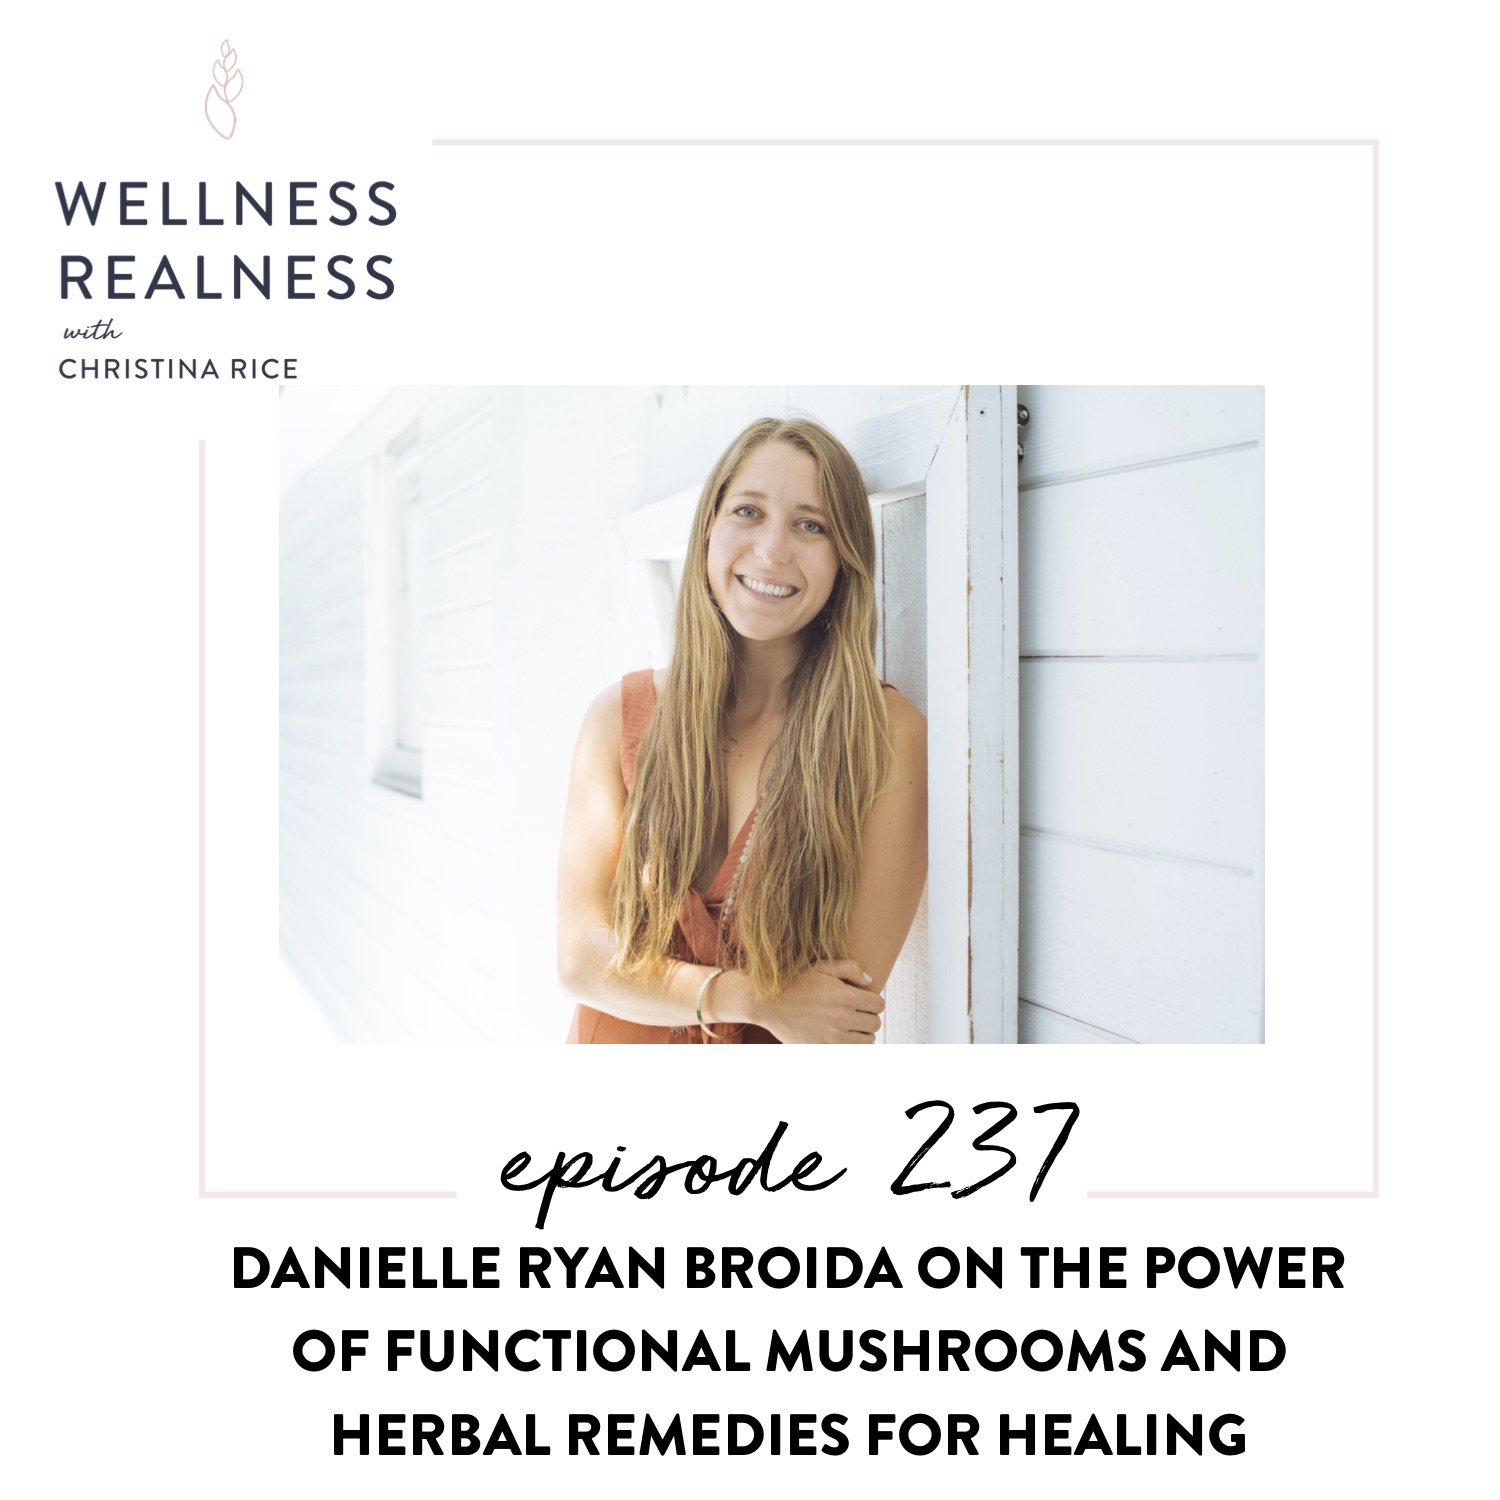 237: Danielle Ryan Broida on the Power of Functional Mushrooms and Herbal Remedies for Healing